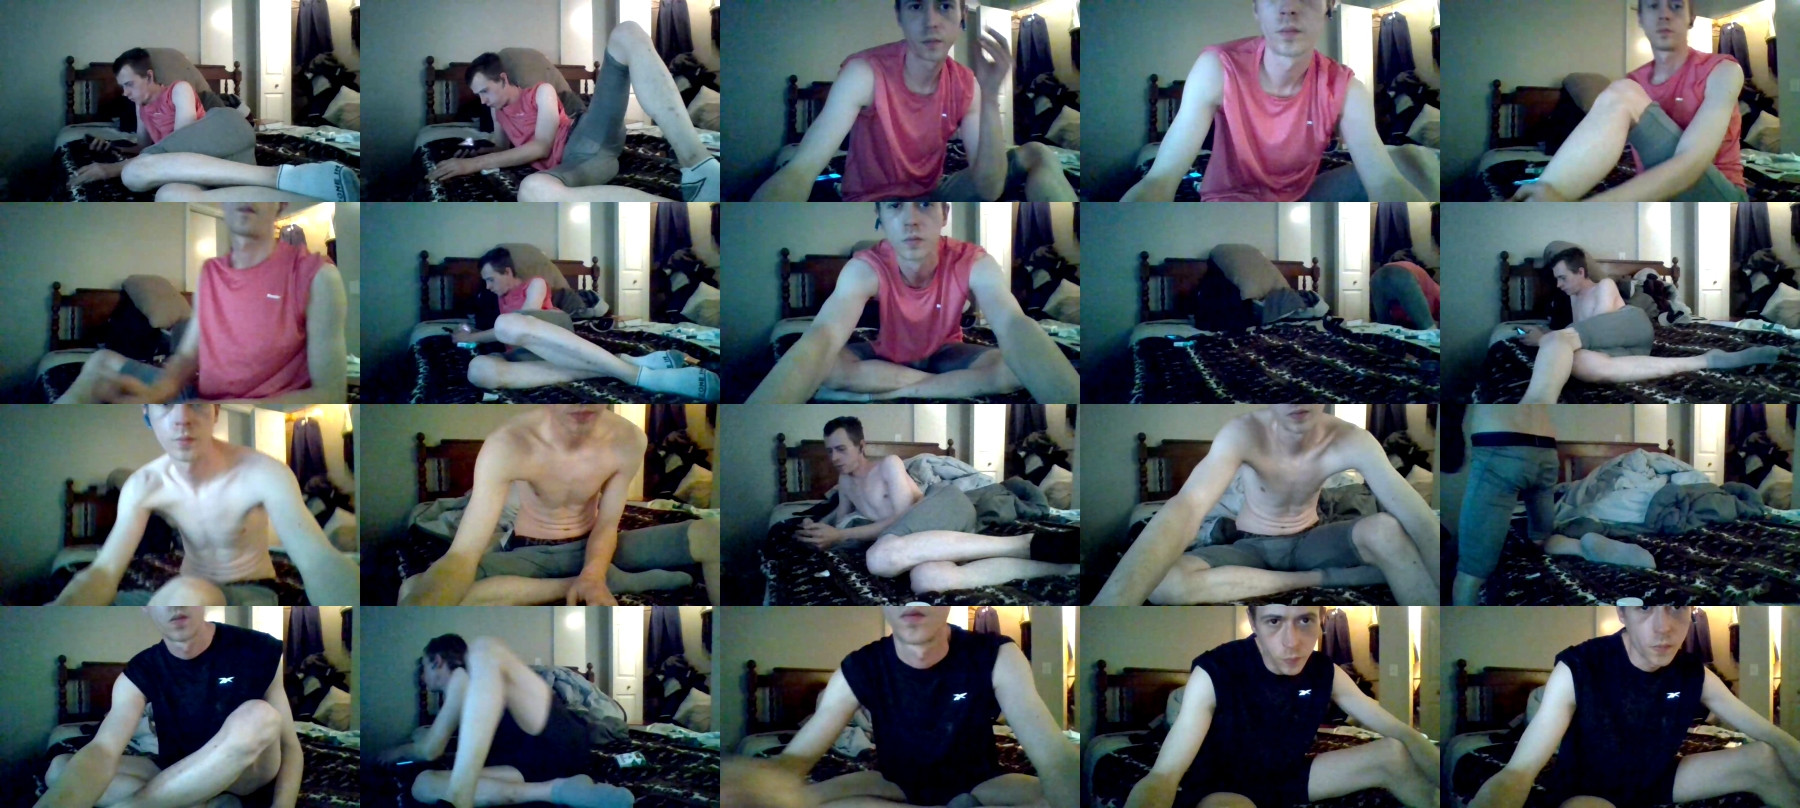 Millerjdm Topless CAM SHOW @ Chaturbate 03-04-2021